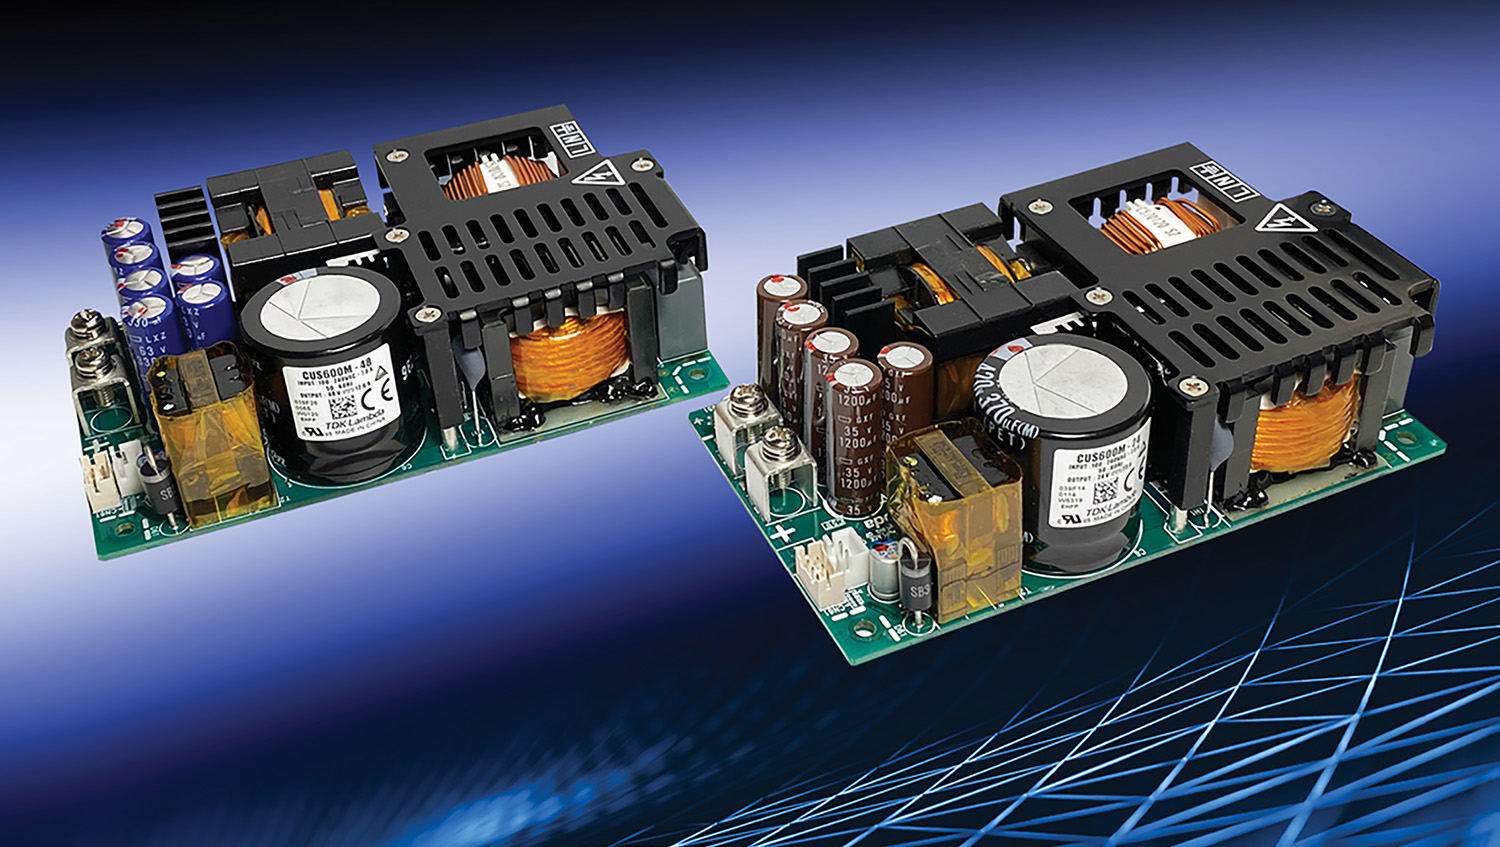 600 W power supplies for industrial and medical applications